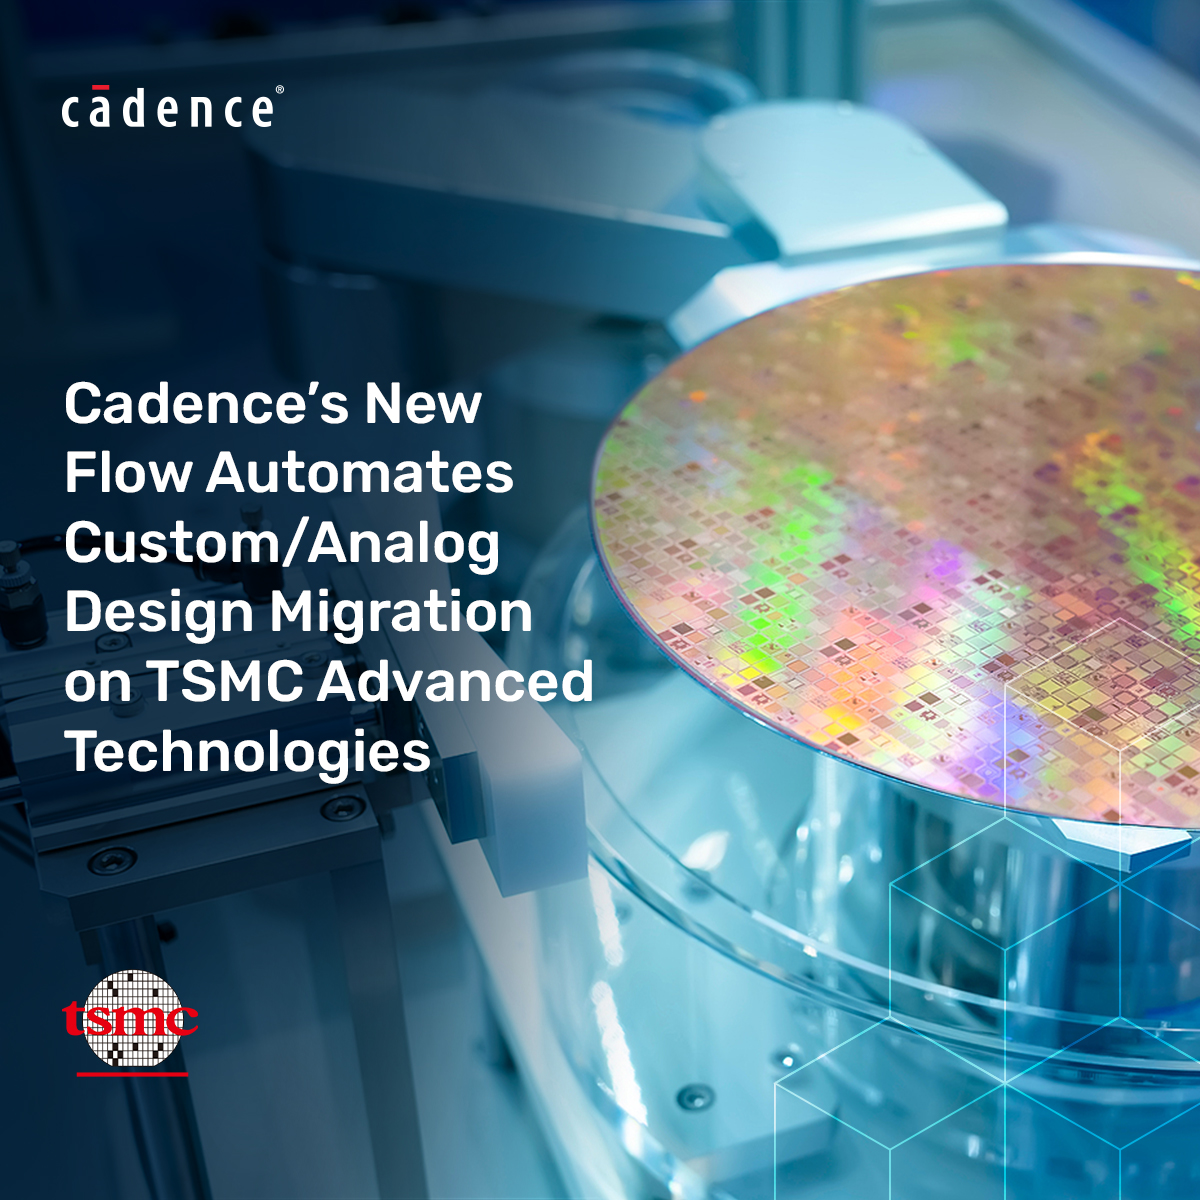 Exciting news! Cadence’s new Virtuoso flow automates custom/analog design migration on TSMC advanced technologies and reduces design cycle time by more than 2.5X. Read the press release here >> bit.ly/3TV7pRb